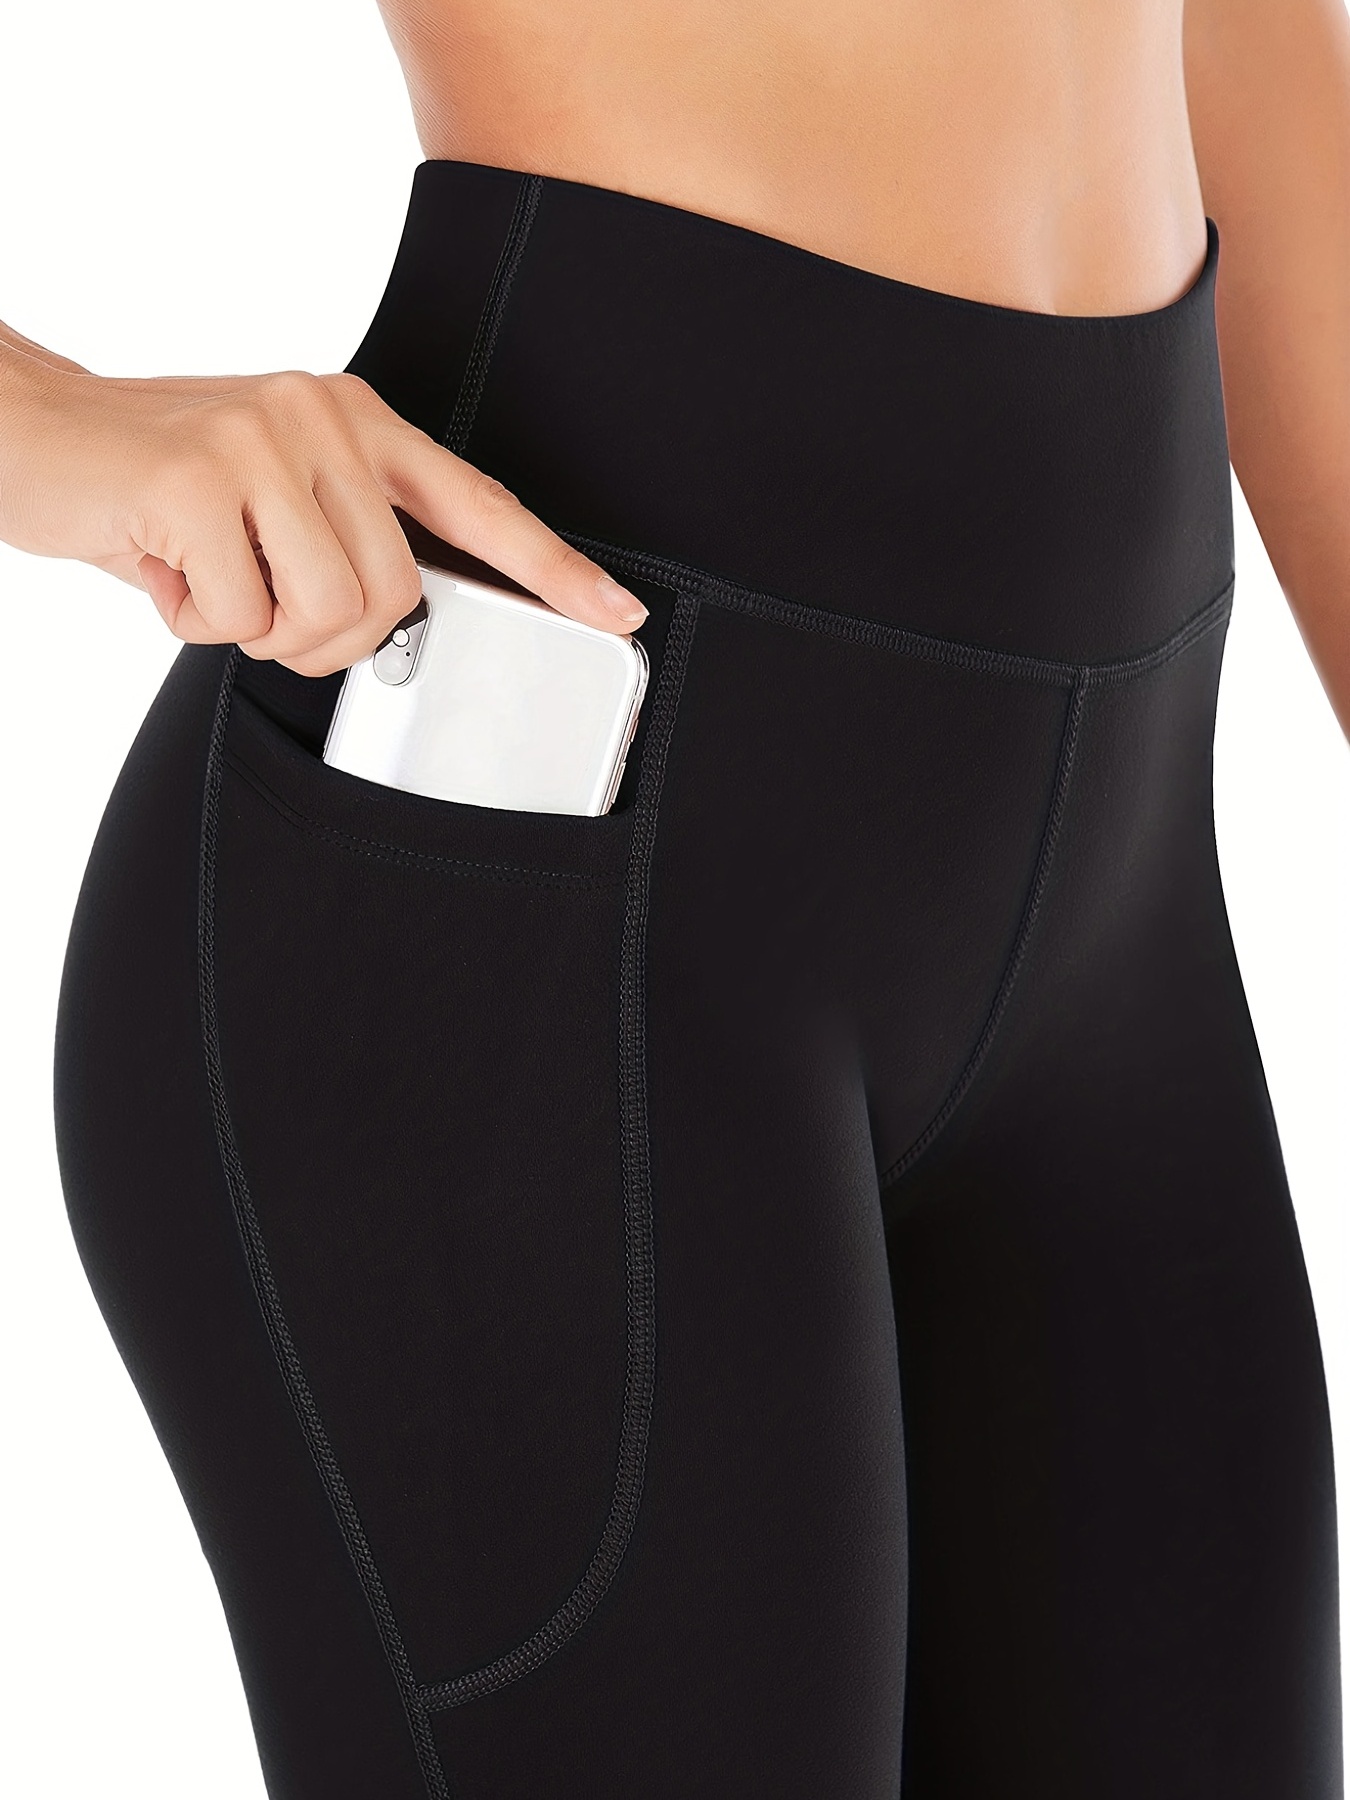 bootcut yoga pant with side pockets